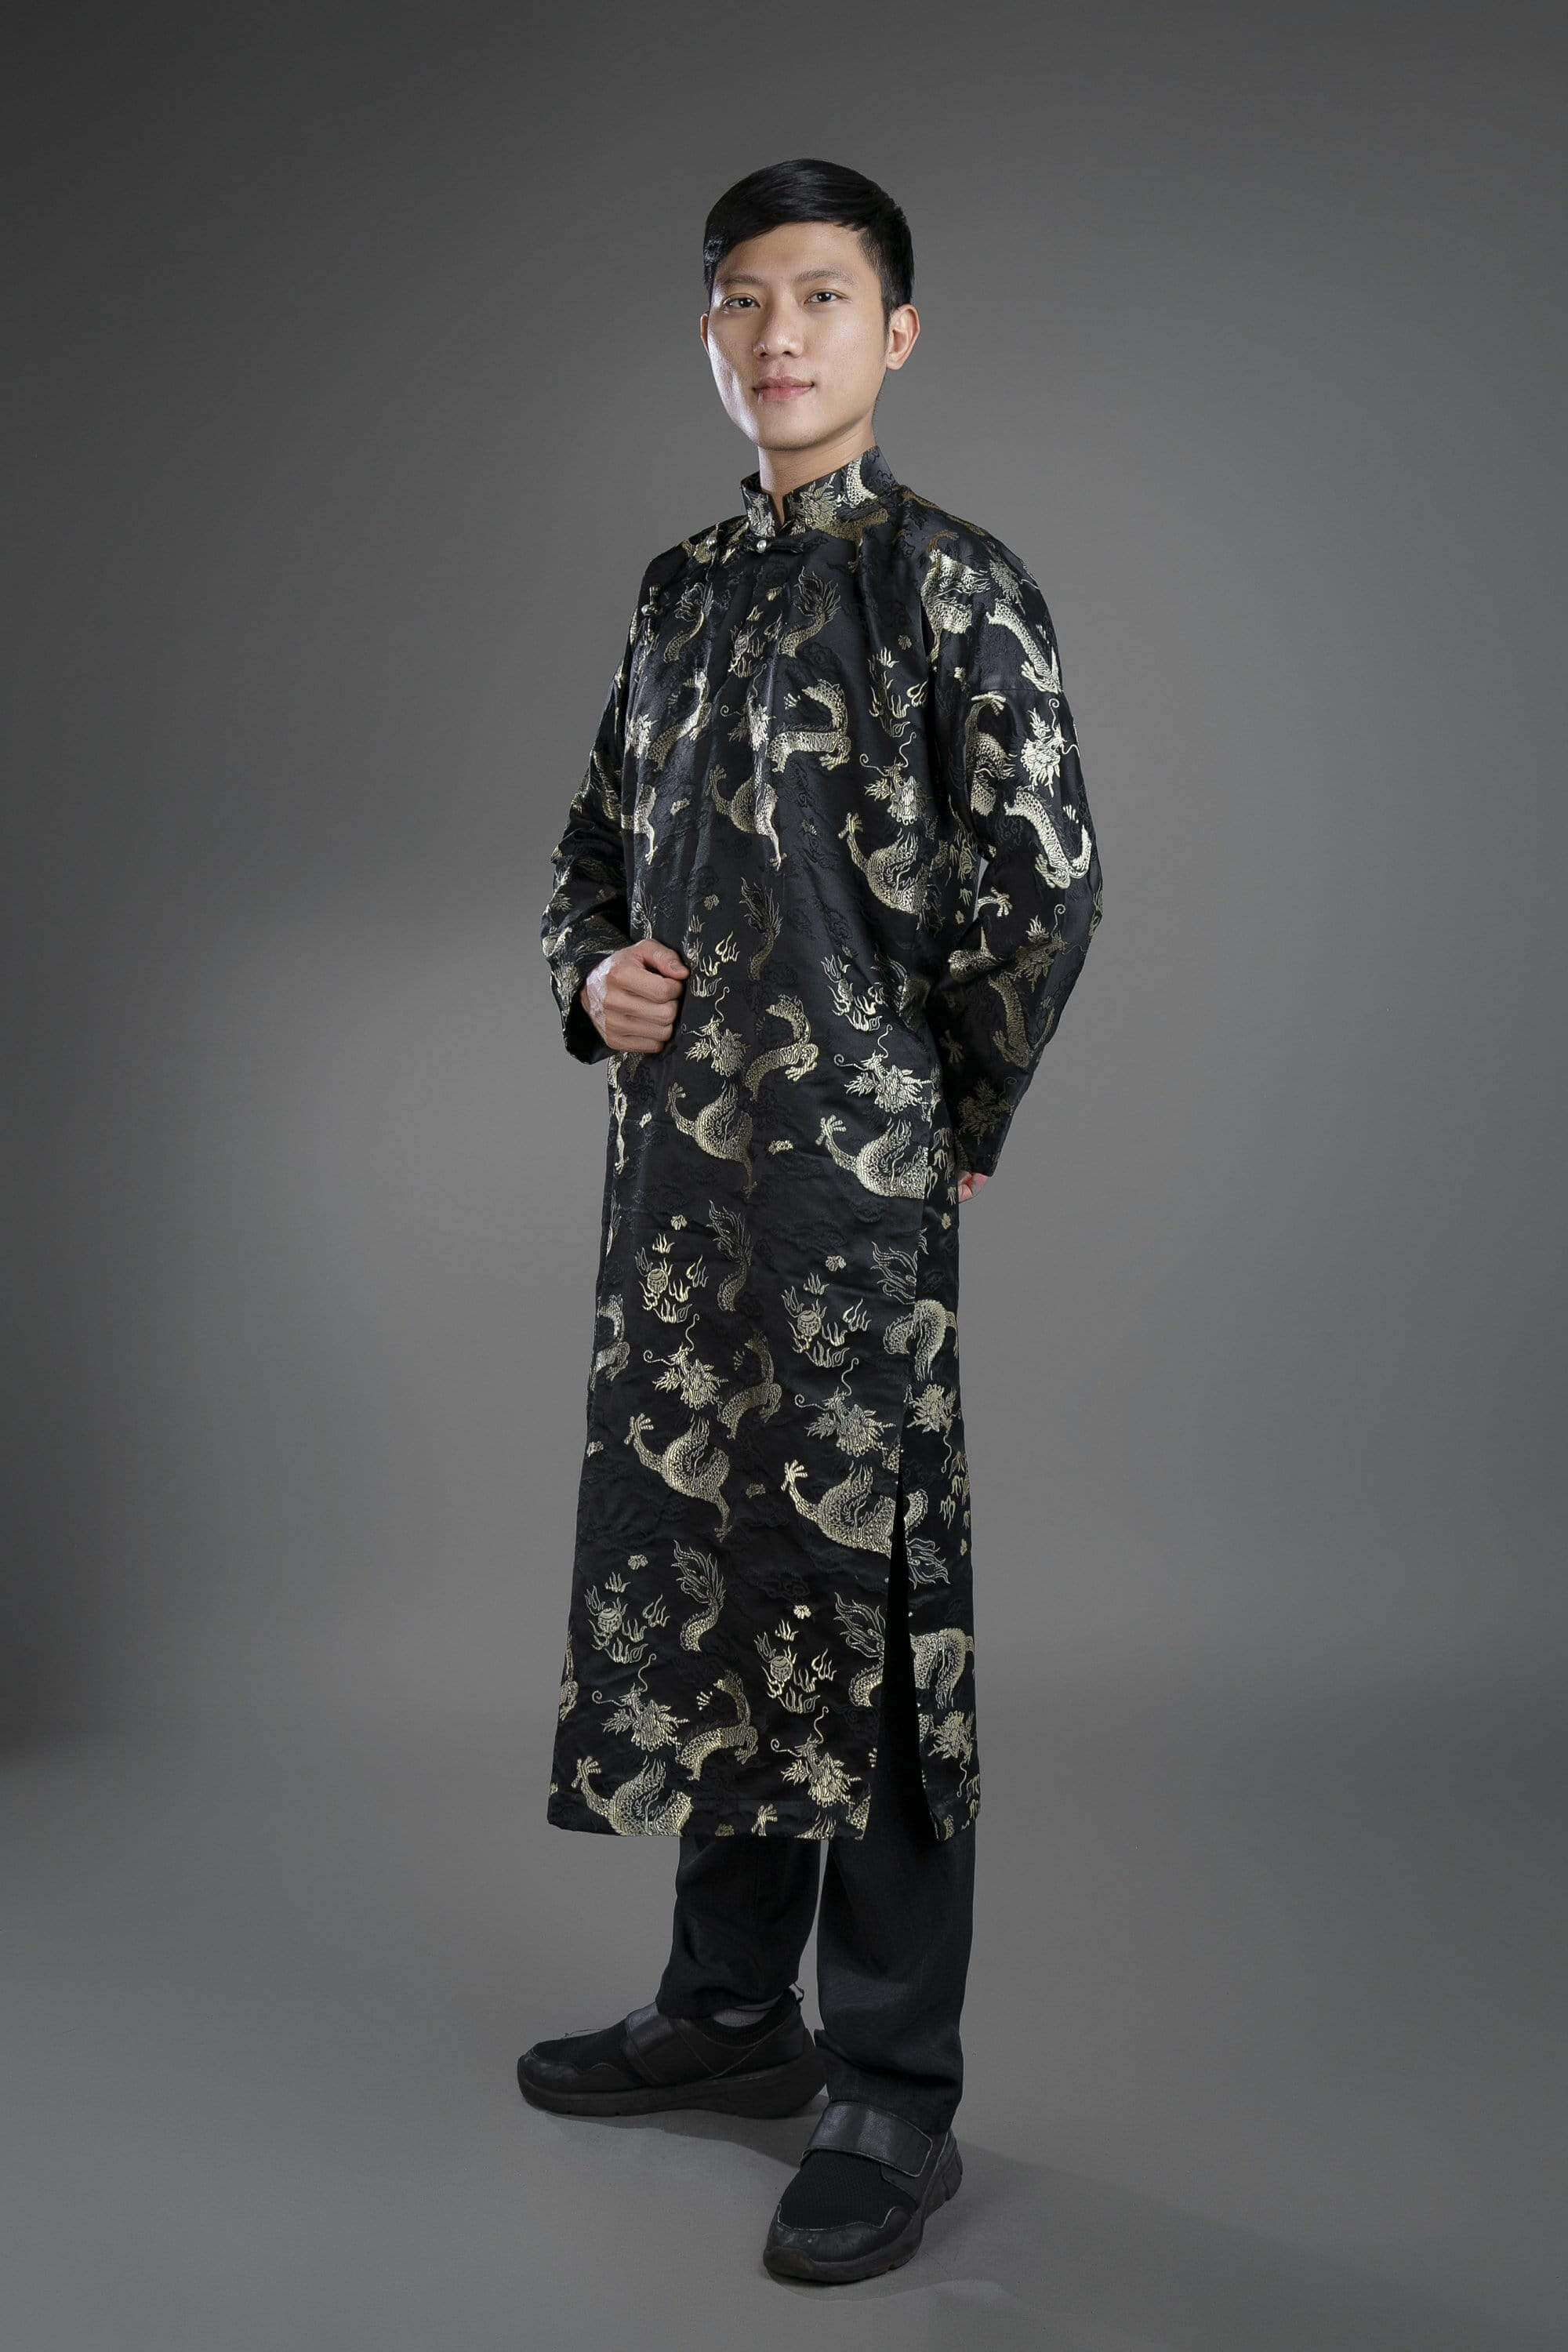 Black or Red Ao Dai for Men, Hand Painted Vietnamese Traditional